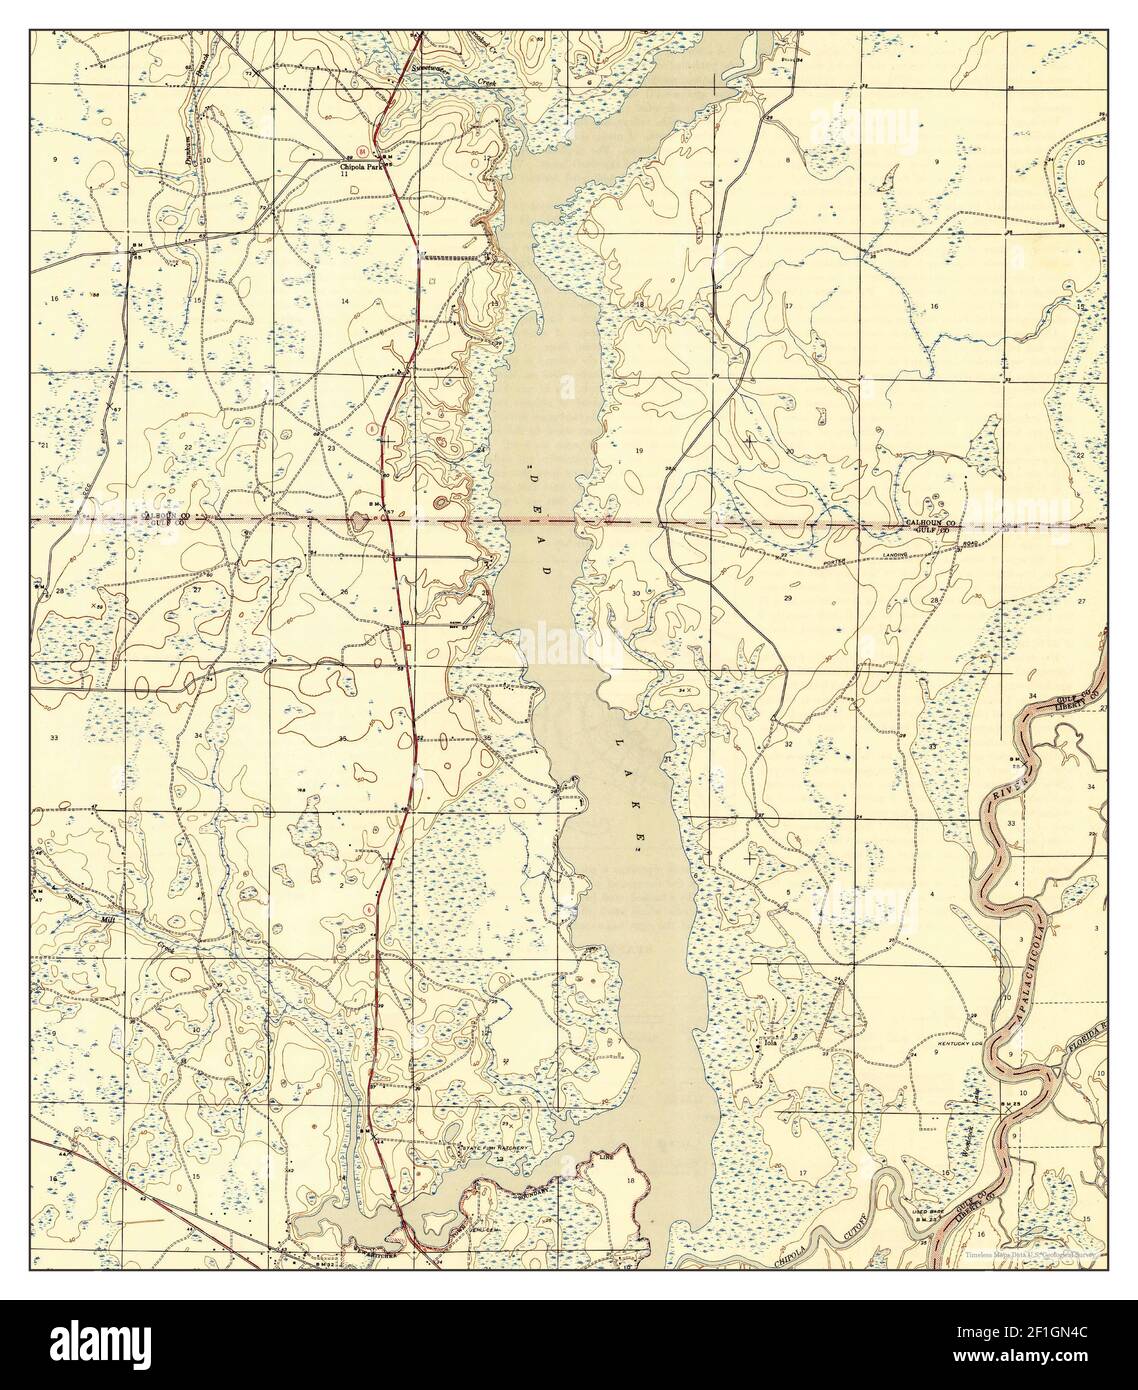 Dead Lake, Florida, map 1945, 1:31680, United States of America by Timeless Maps, data U.S. Geological Survey Stock Photo